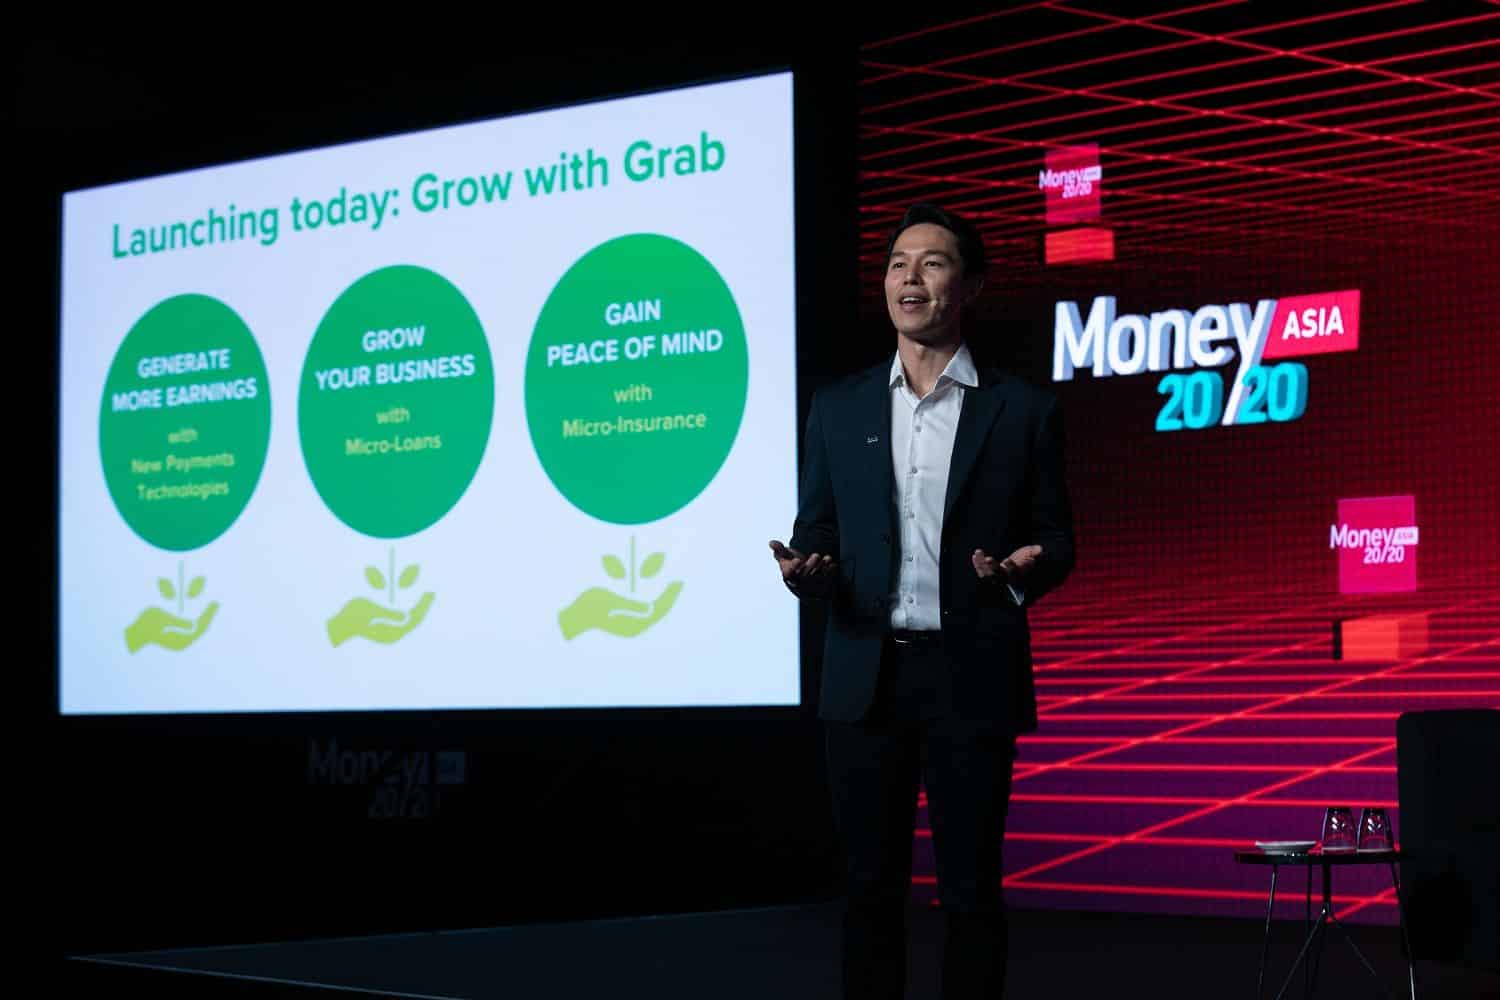 FOMO Pay, the pilot partner for Grab Pay to launch new payments technologies